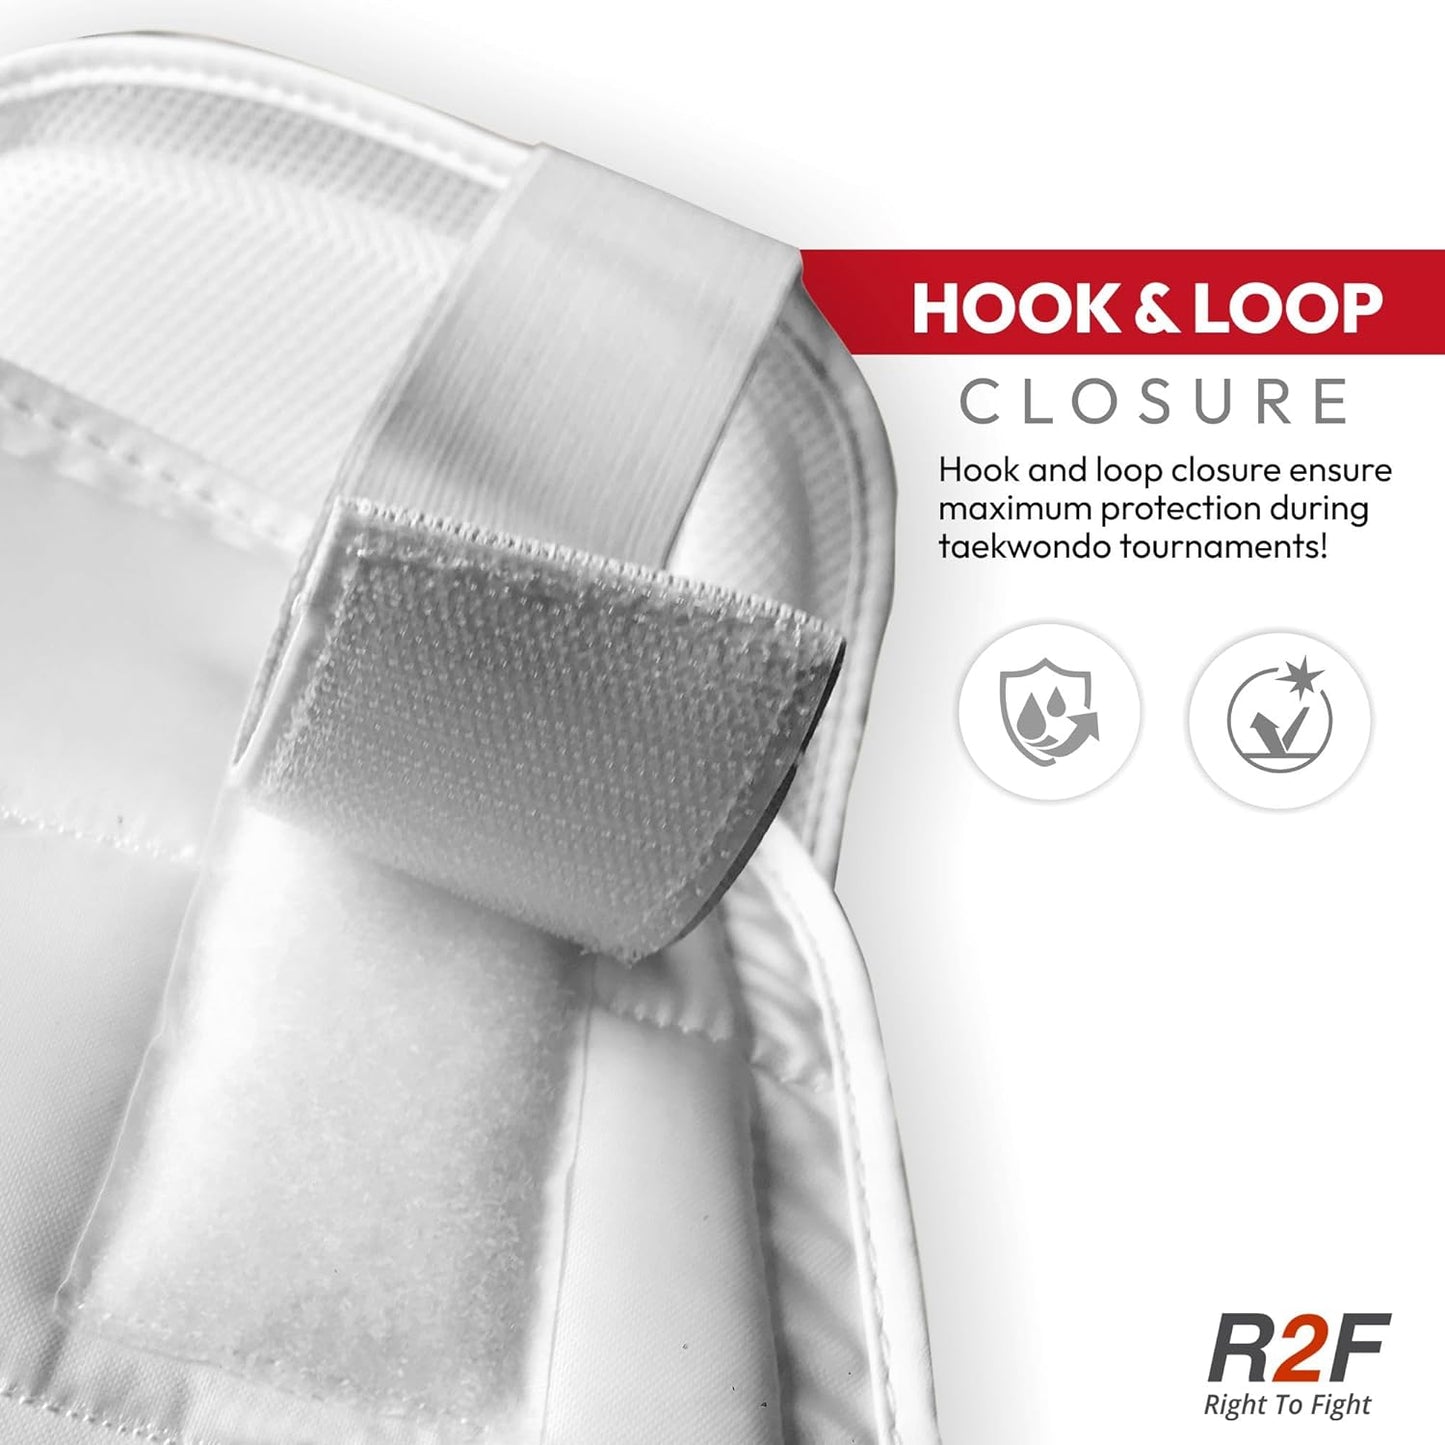 R2F Sports offers high-quality chest guard body protectors for karate training, MMA, and martial arts. These protective gear are designed to provide maximum safety and comfort during intense training sessions. Shop now for reliable and durable chest guards at R2F Sports.